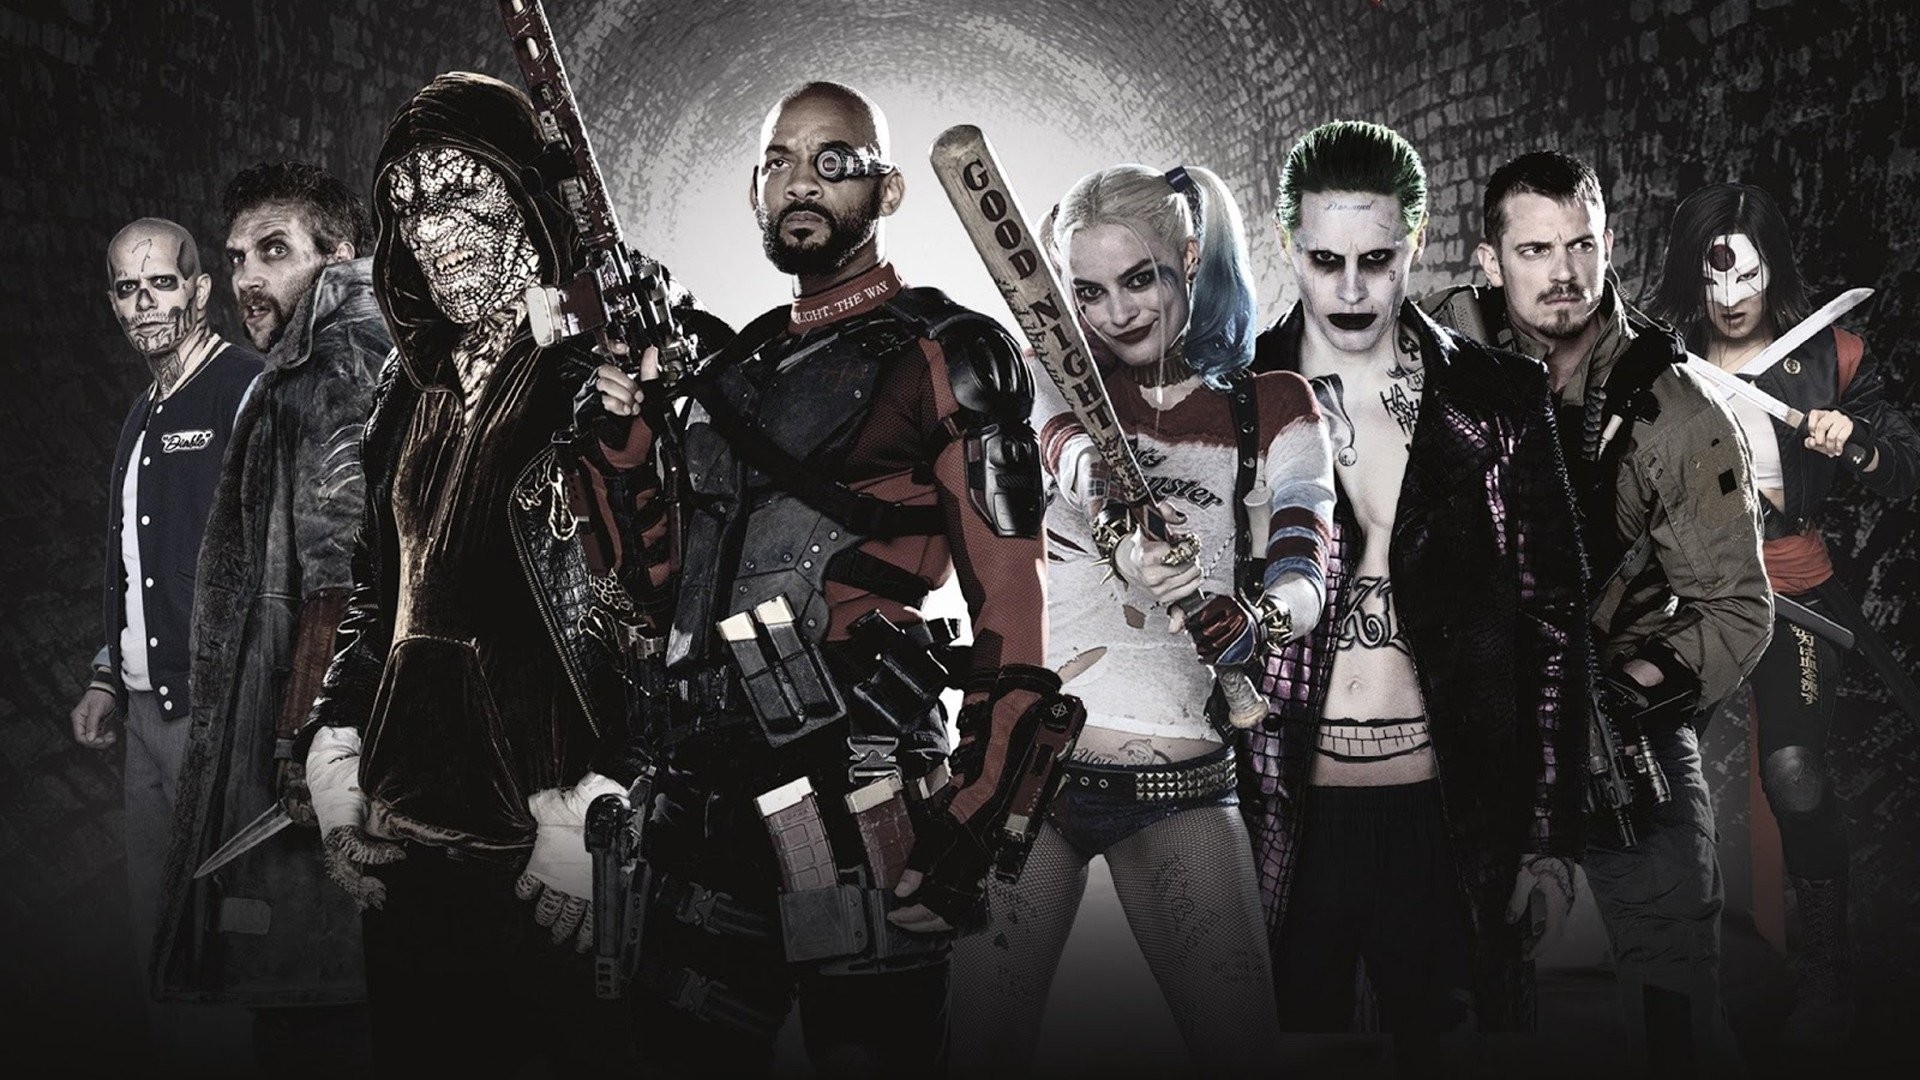 48 Suicide Squad Wallpaper On Wallpapersafari Images, Photos, Reviews